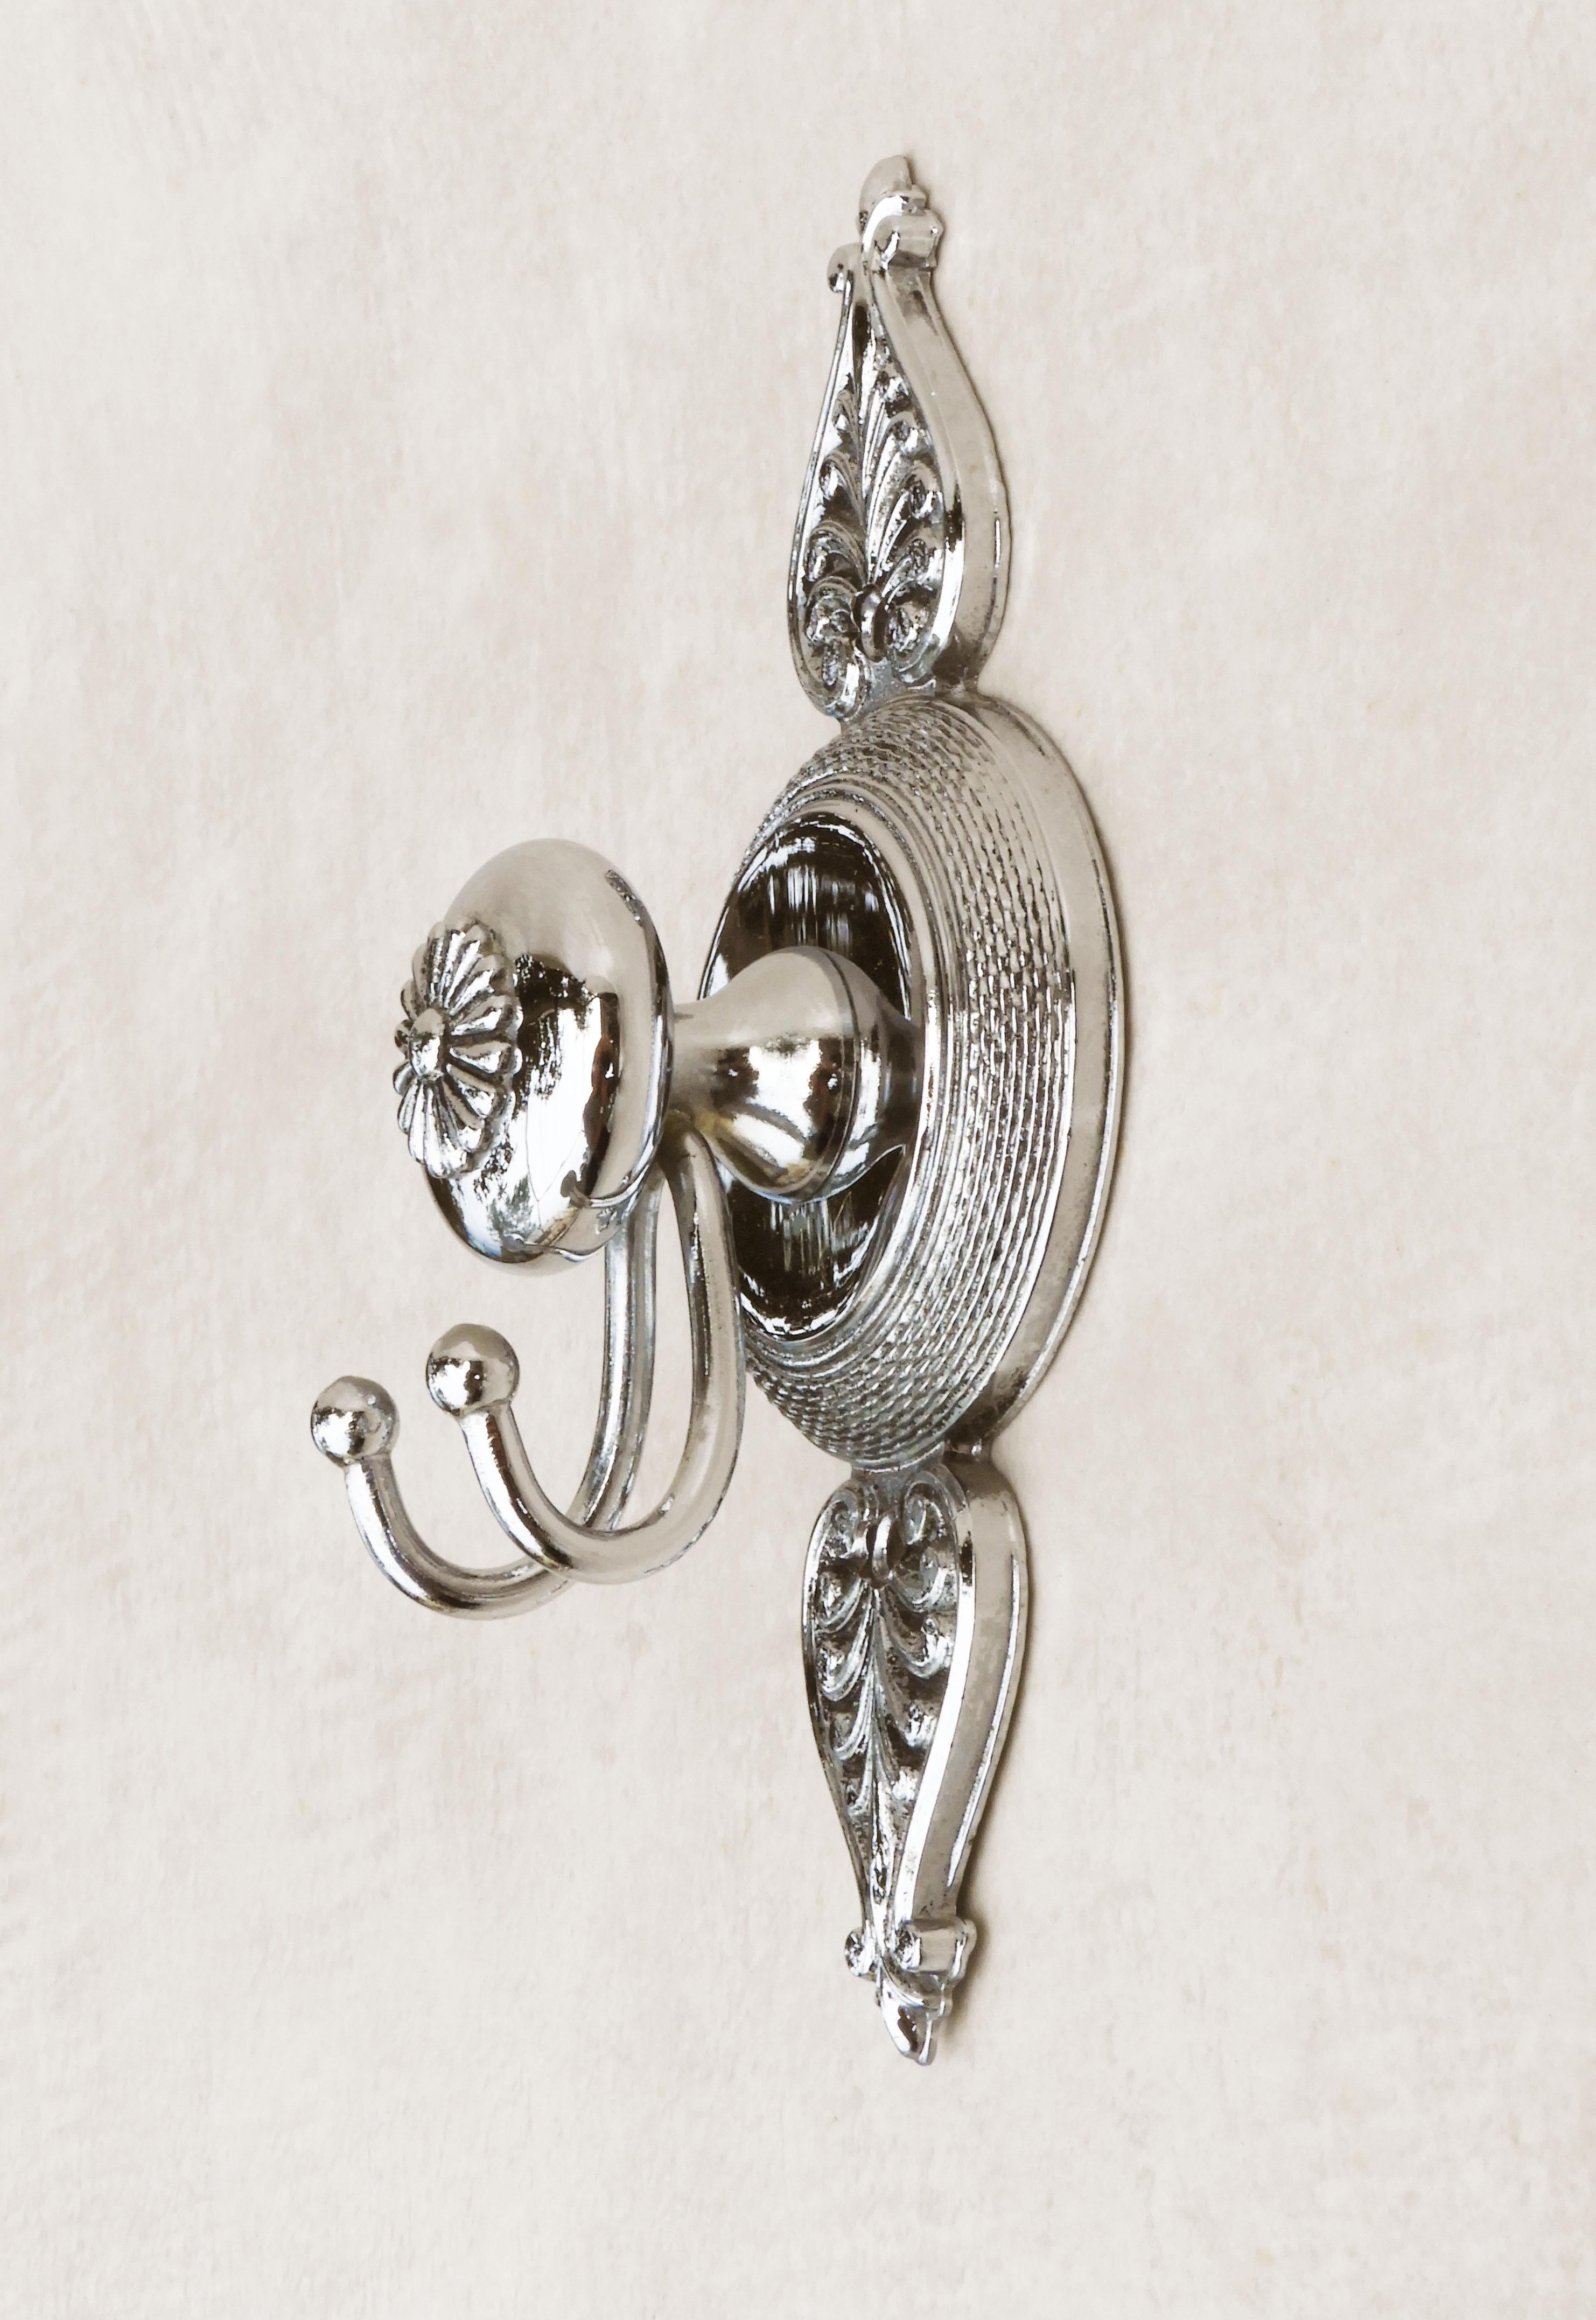 French Empire Revival Style Chrome Vanity Hook, C1970s. Stylish French double hook in chrome,  a sophisticated modern take on a timeless classic design. Well-made, good-quality piece, in great vintage condition with only light wear commensurate with